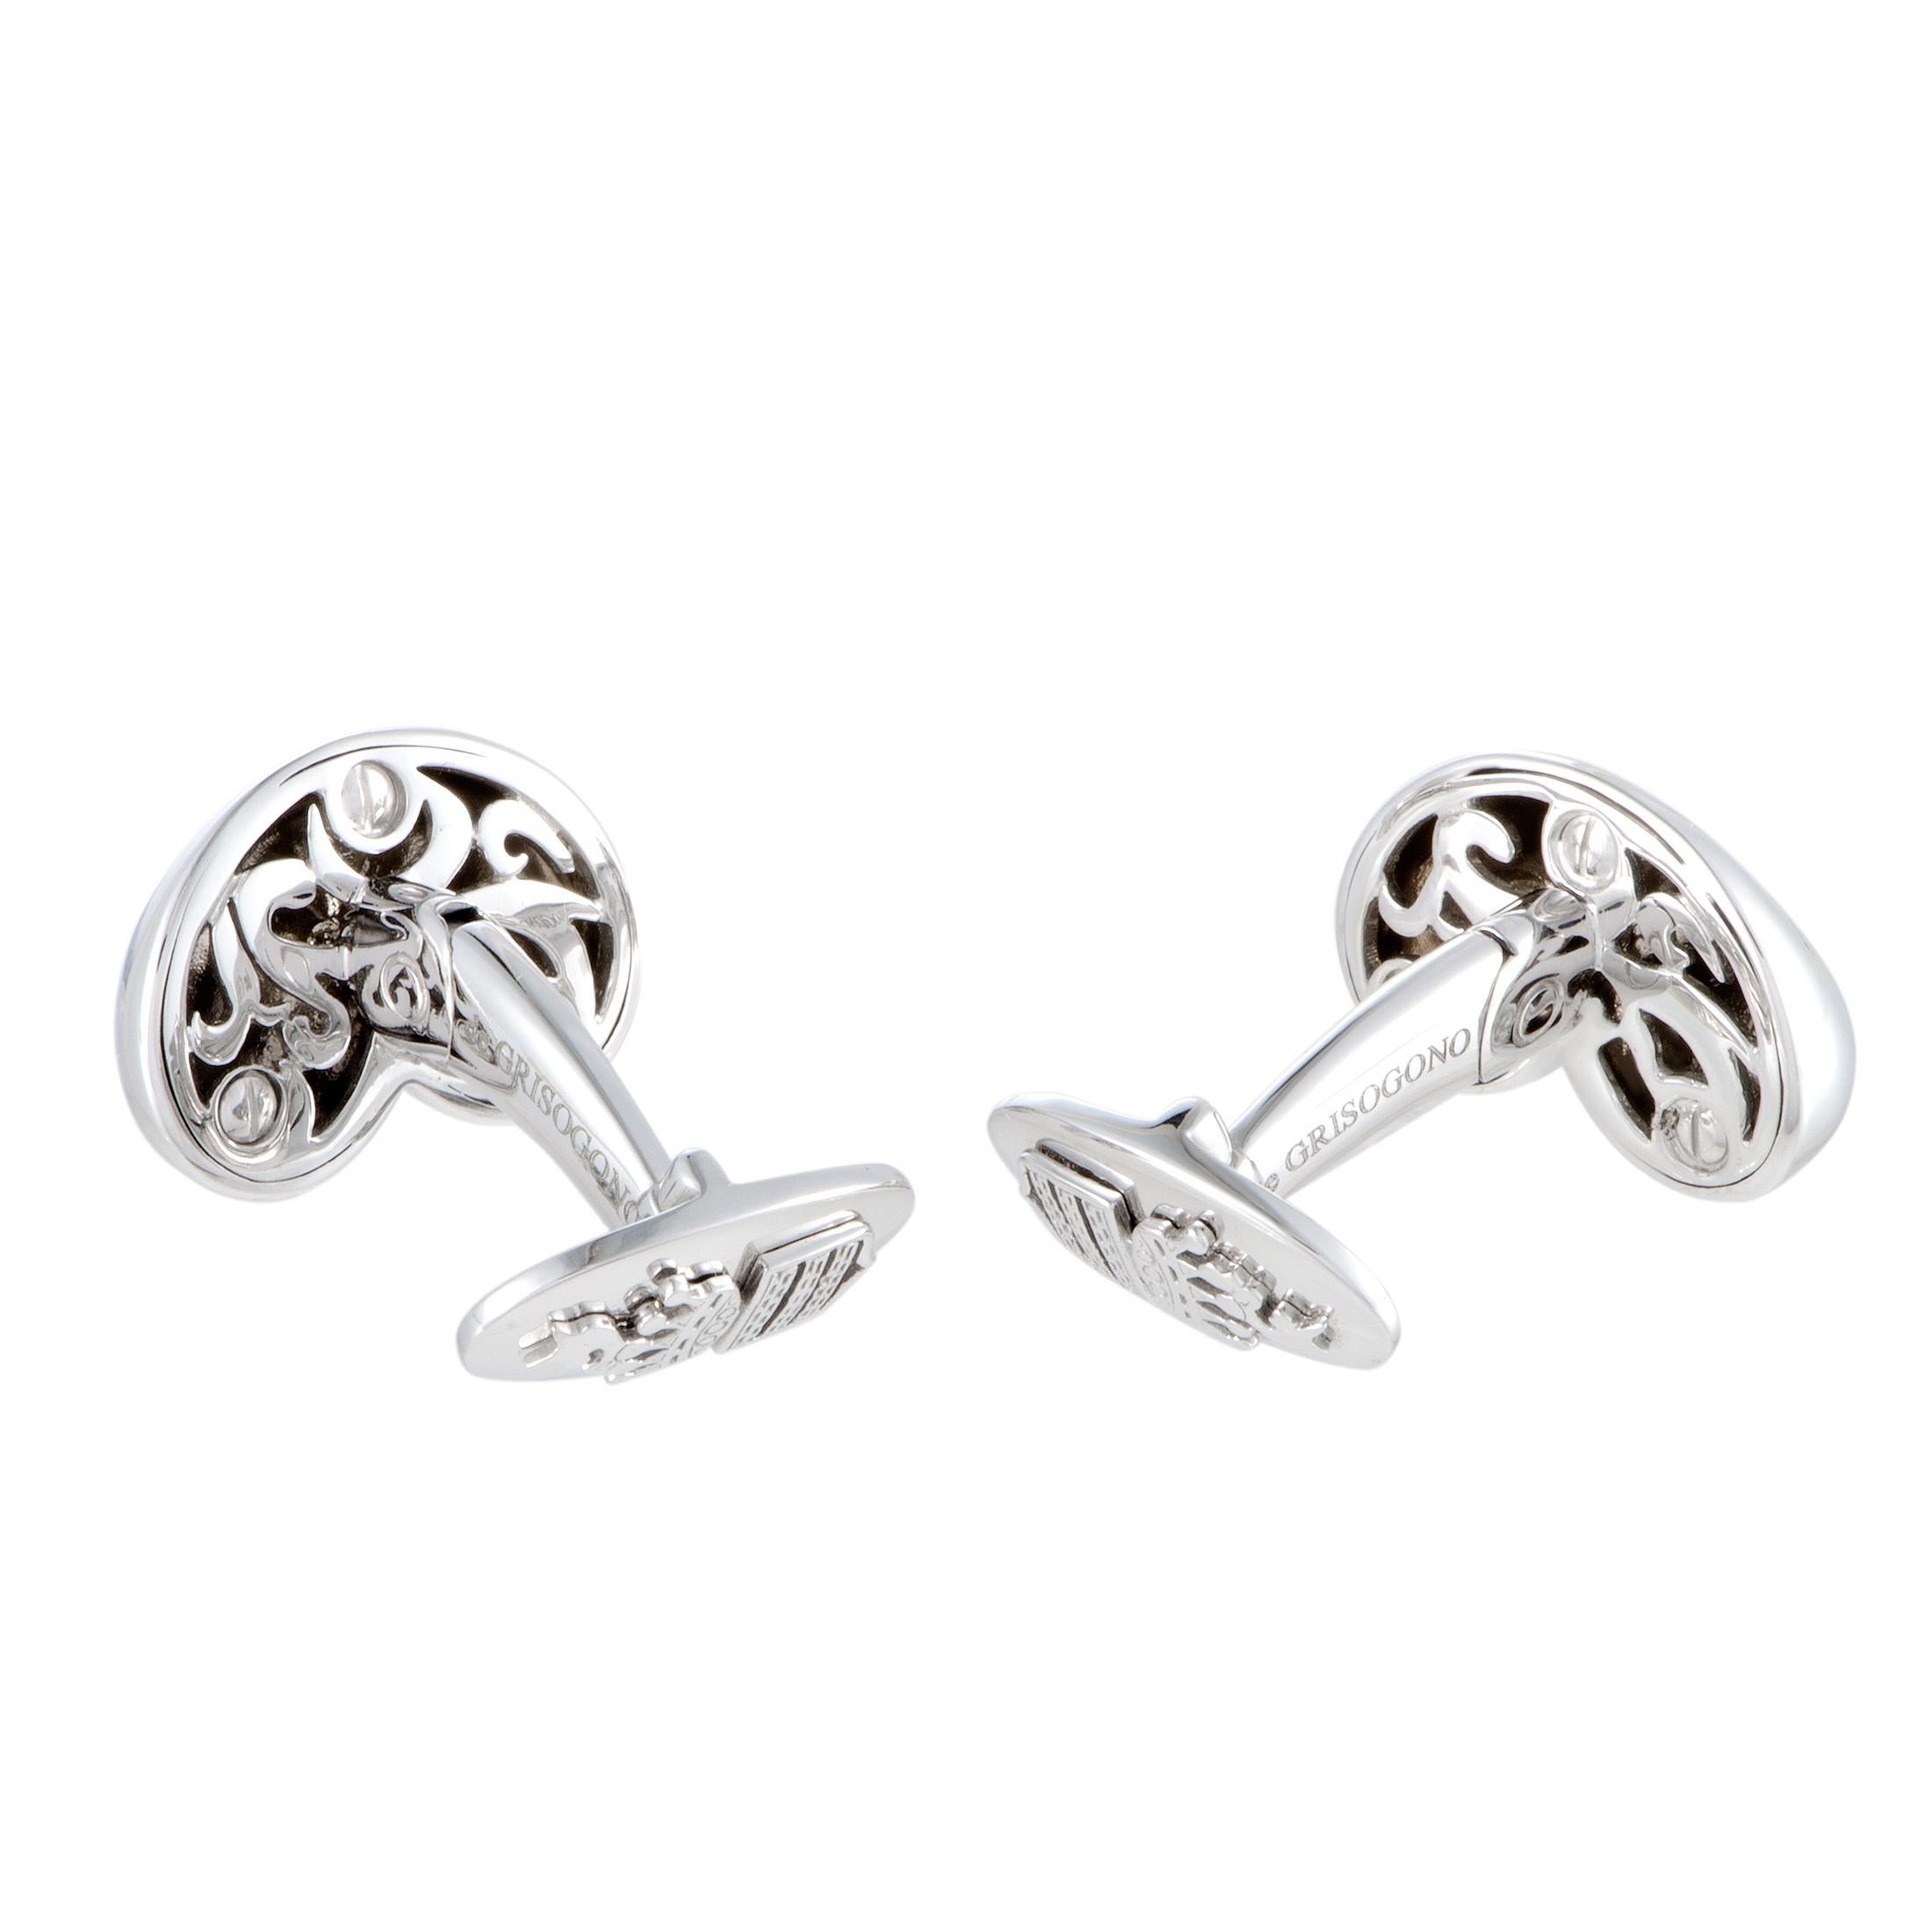 The ever-luxurious combination of prestigiously gleaming gold and irresistibly scintillating diamond stones is featured in this exceptional pair of cufflinks that offers an incredibly attractive look of utmost elegance and sophistication. The